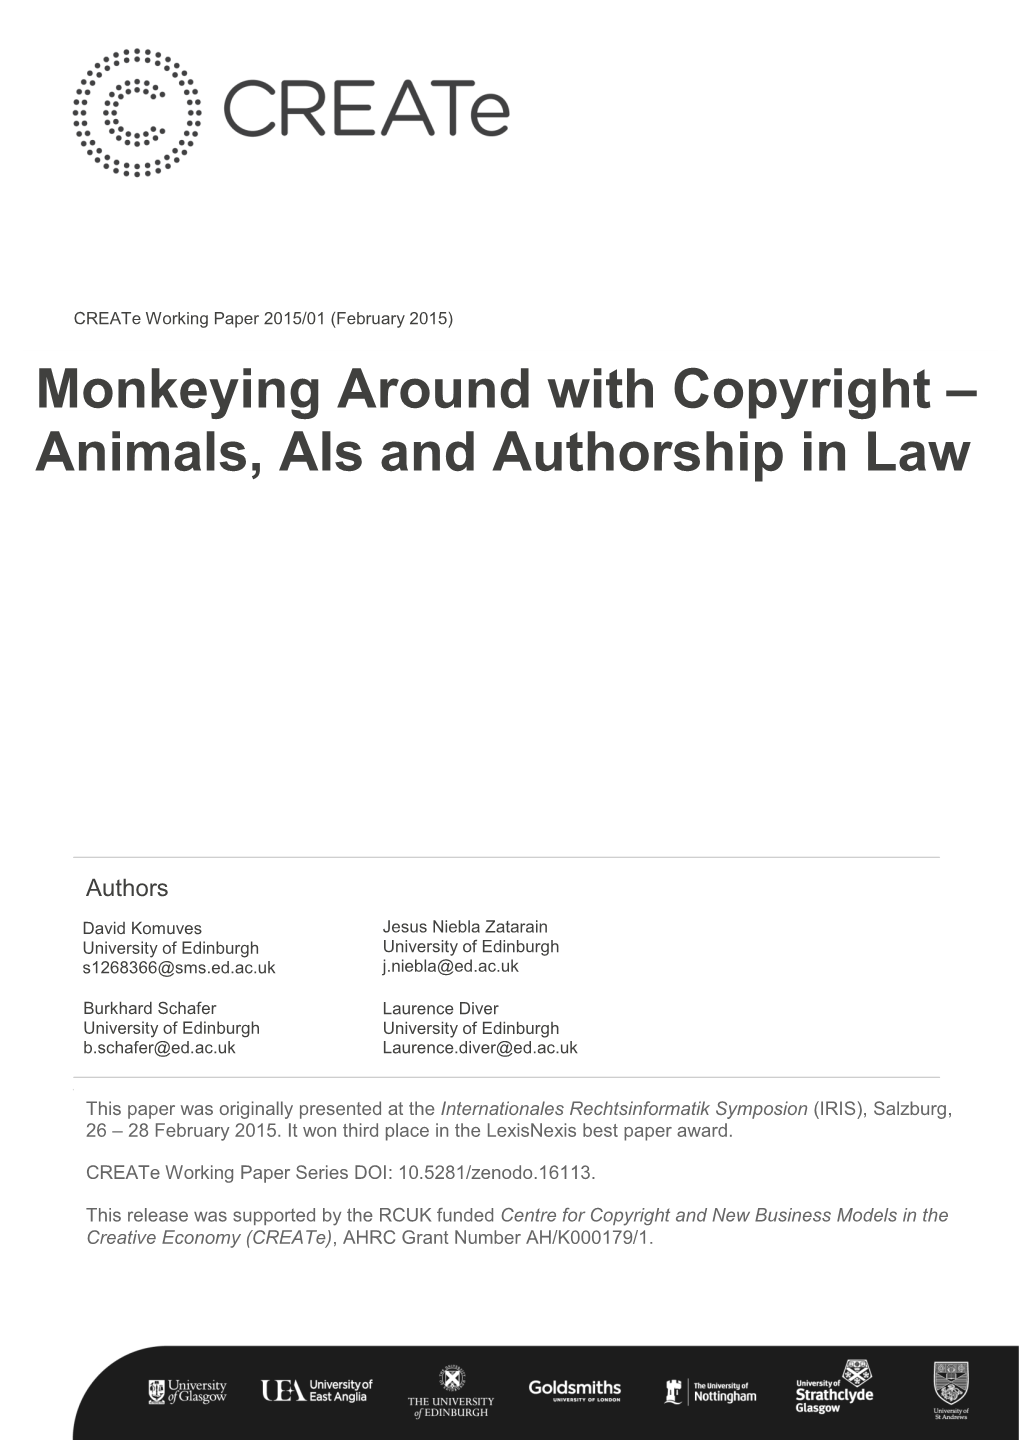 Monkeying Around with Copyright – Animals, Ais and Authorship in Law